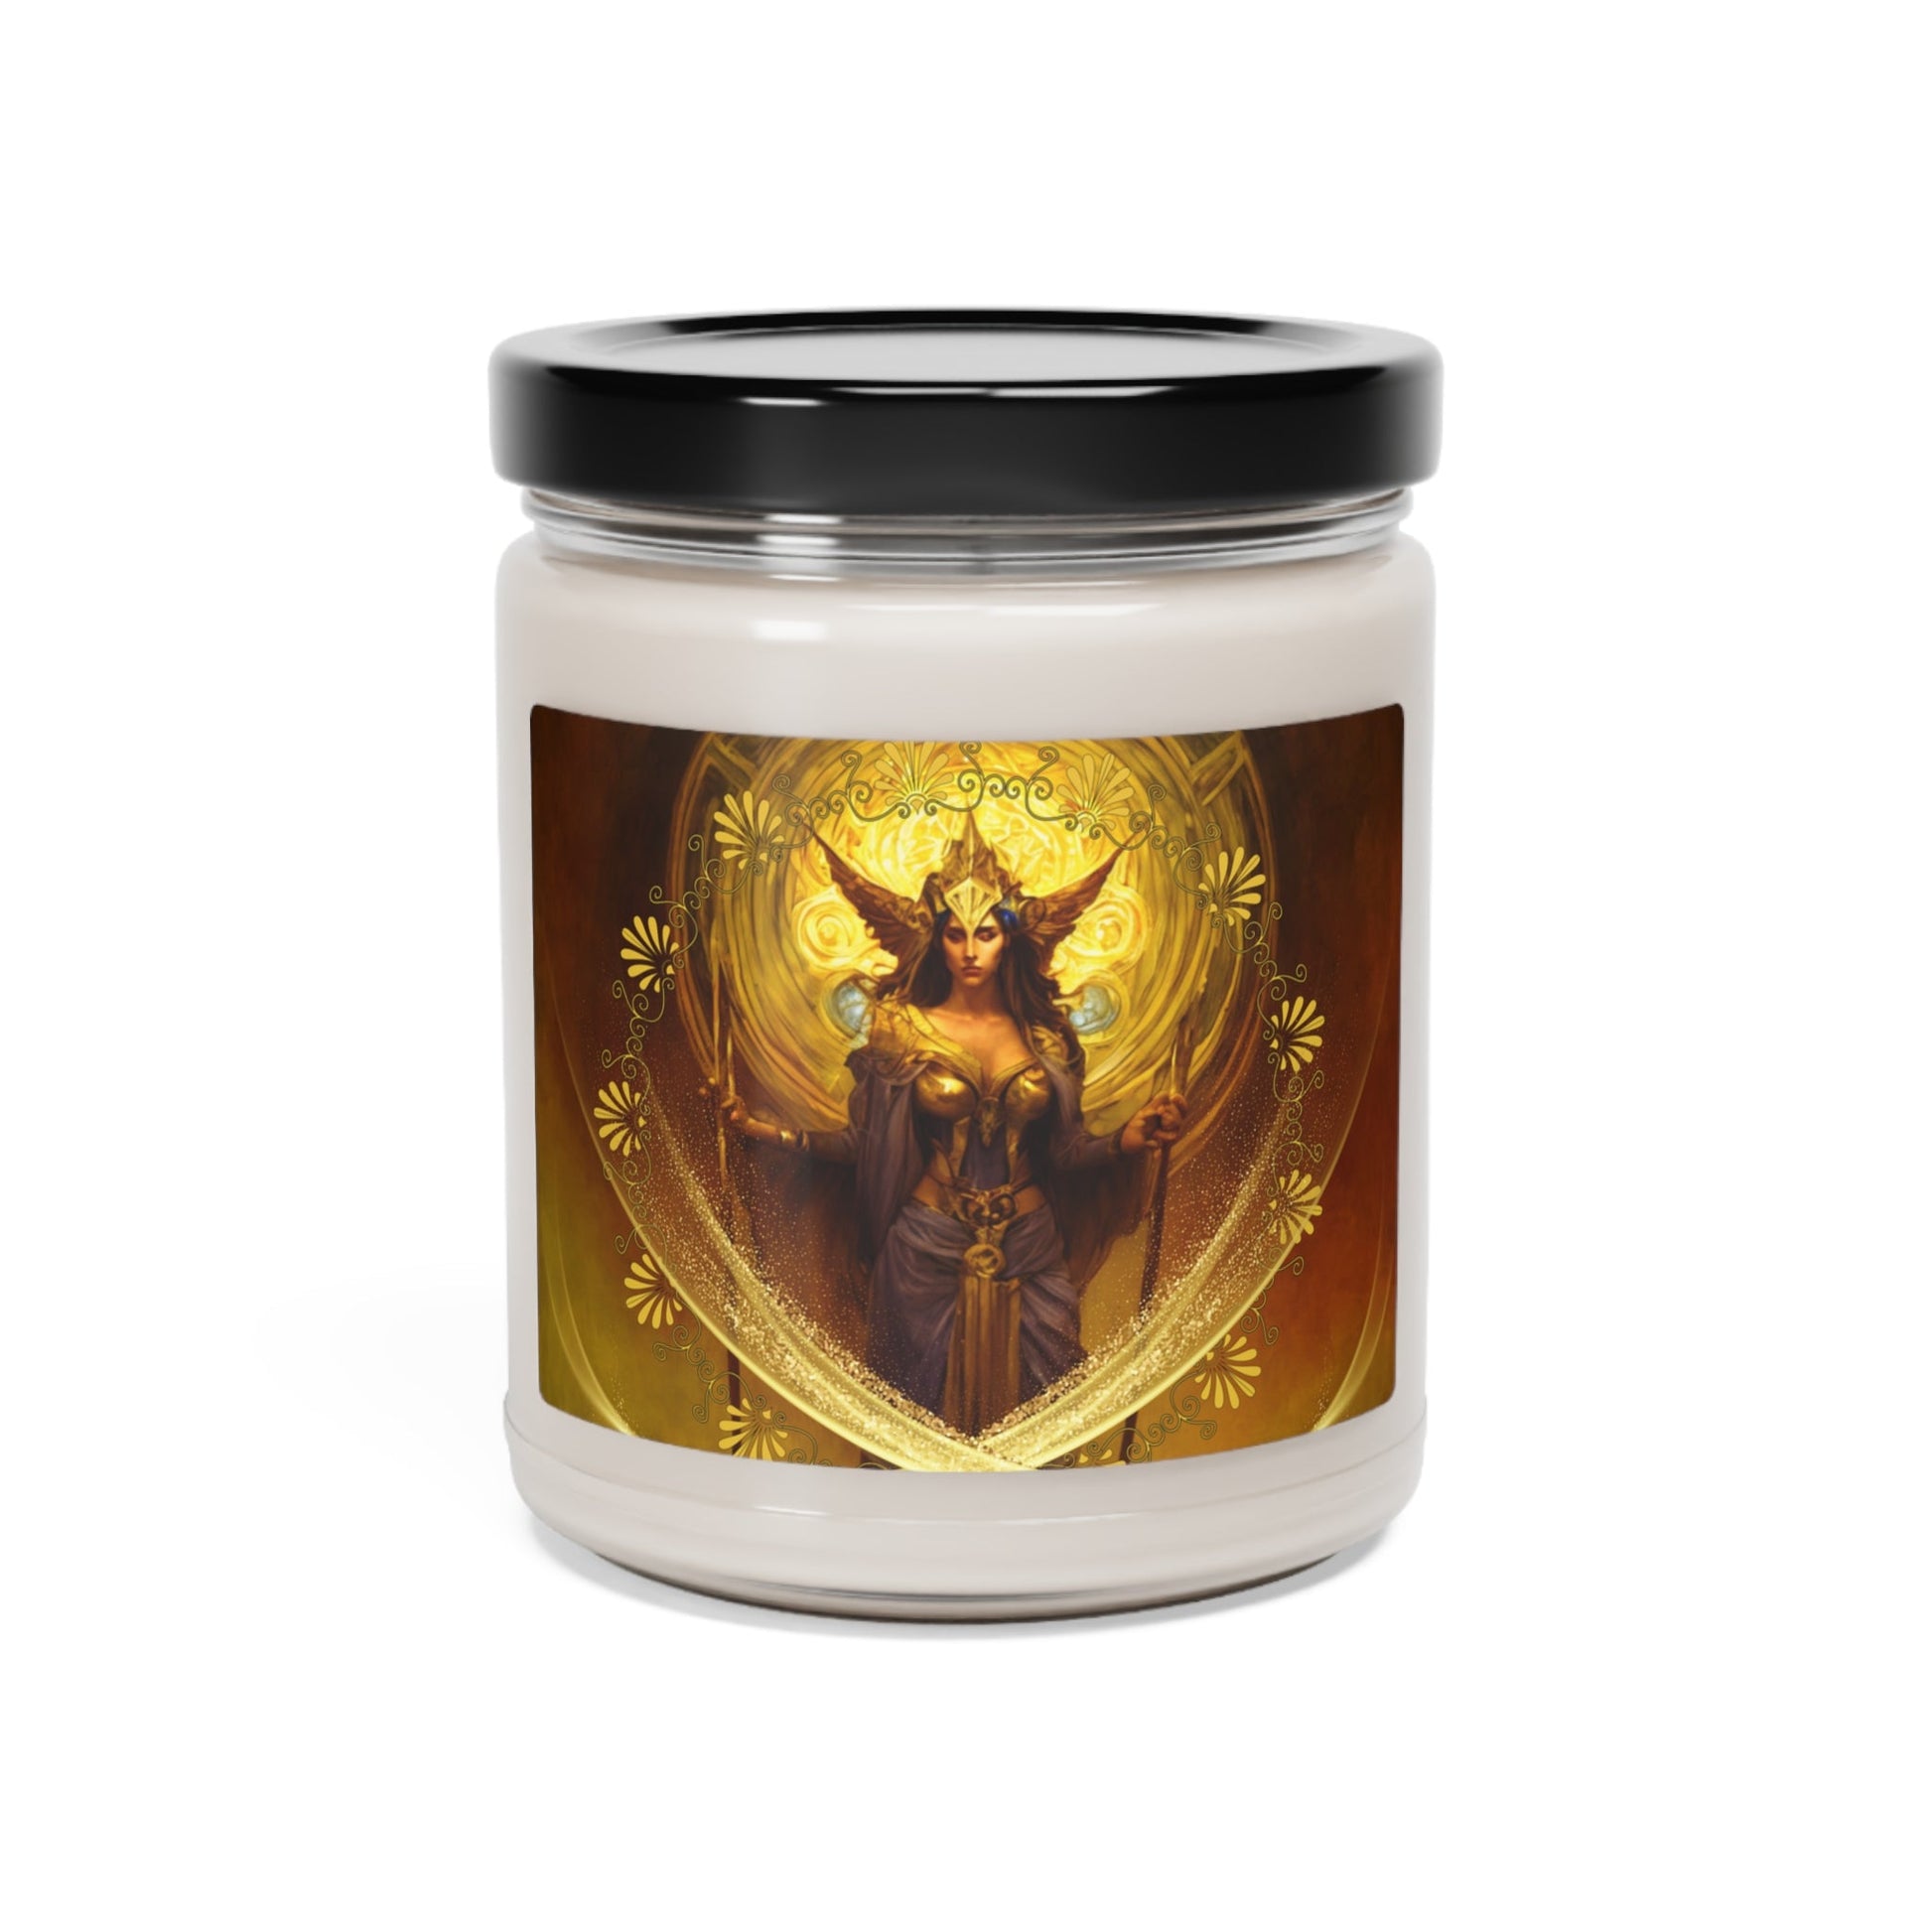 Goddess-Hecate-Scented-Soy-Candle-for-offerings-rituals-initiations-or-praying-and-meditation-11